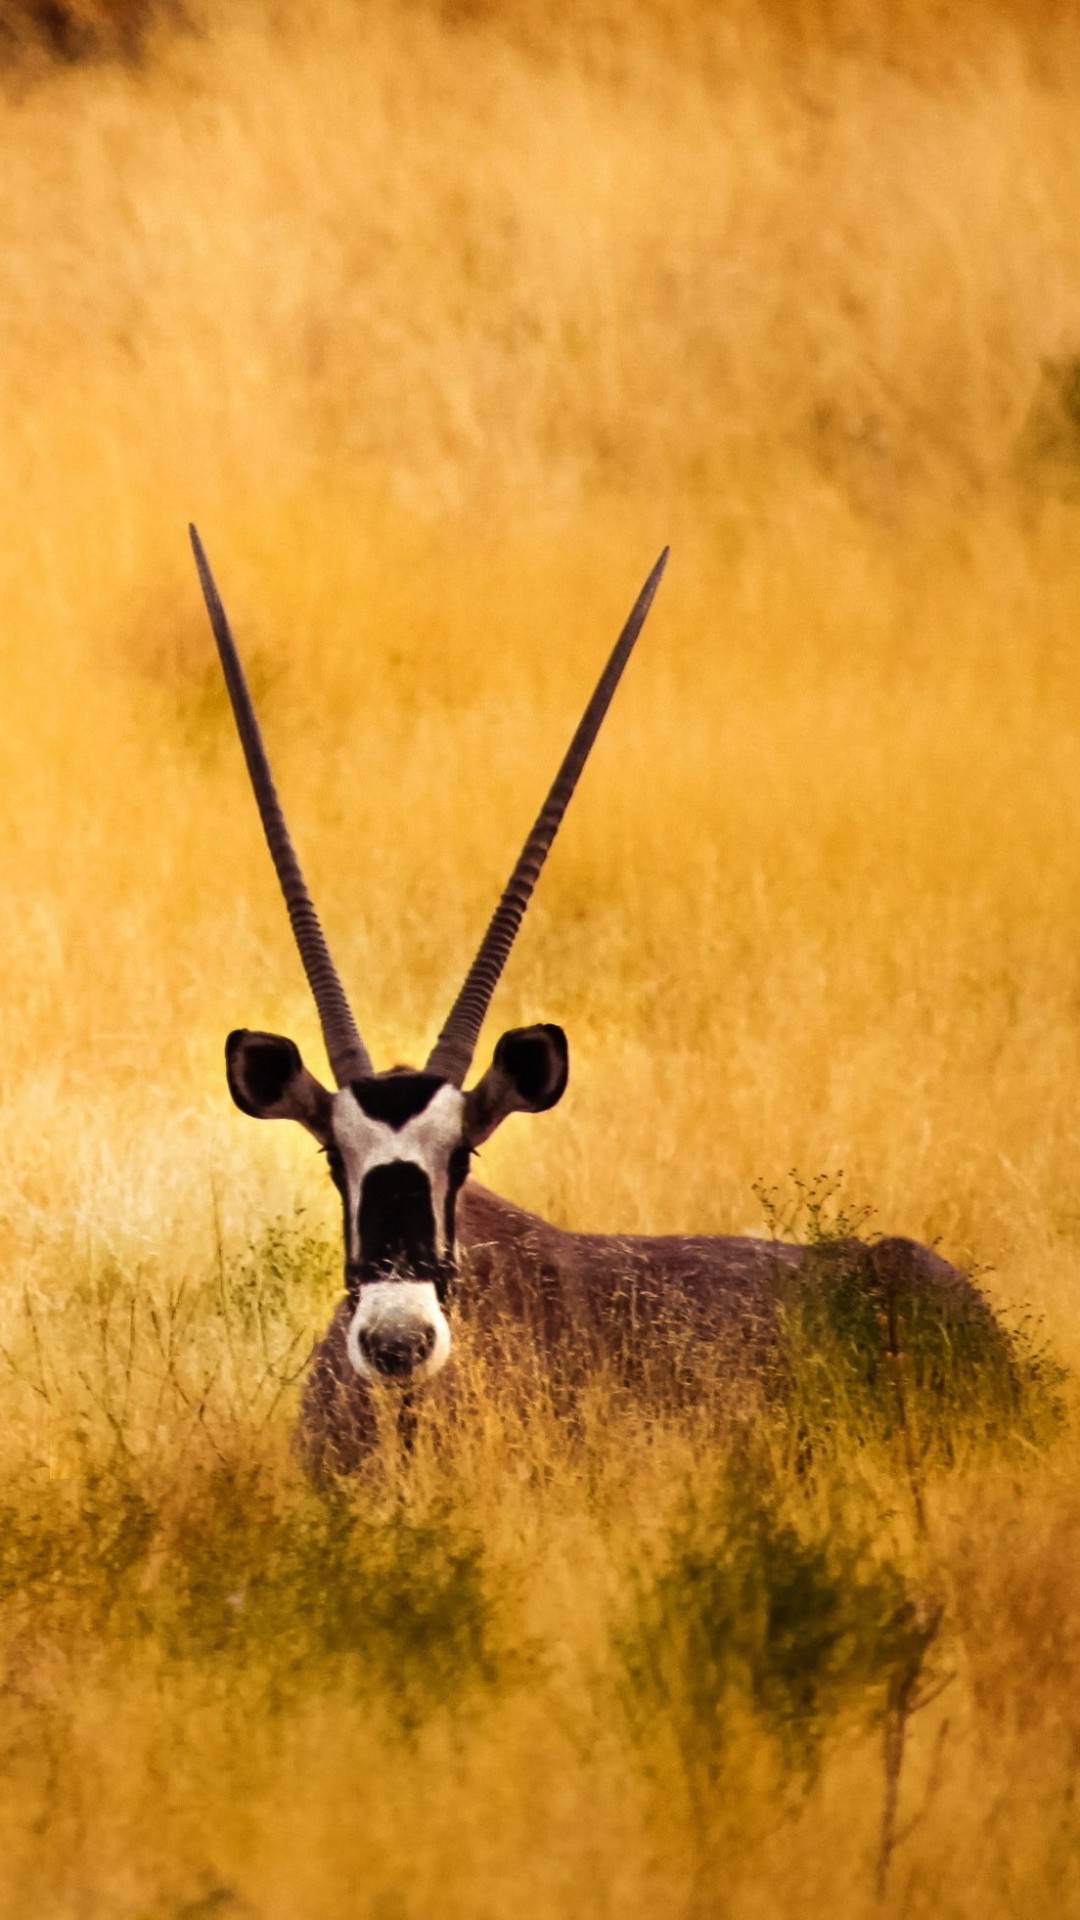 Antelope In The Savanna Wallpaper for SAMSUNG Galaxy S4